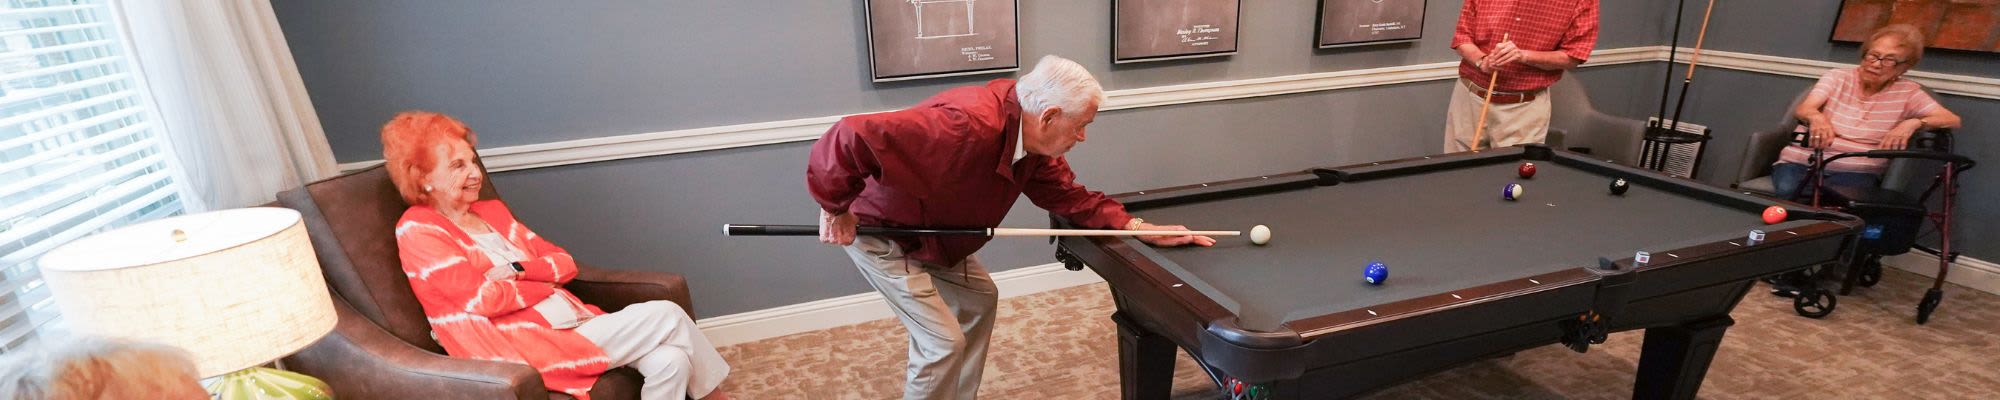 Activities & Events at The Harmony Collection at Hanover in Mechanicsville, Virginia